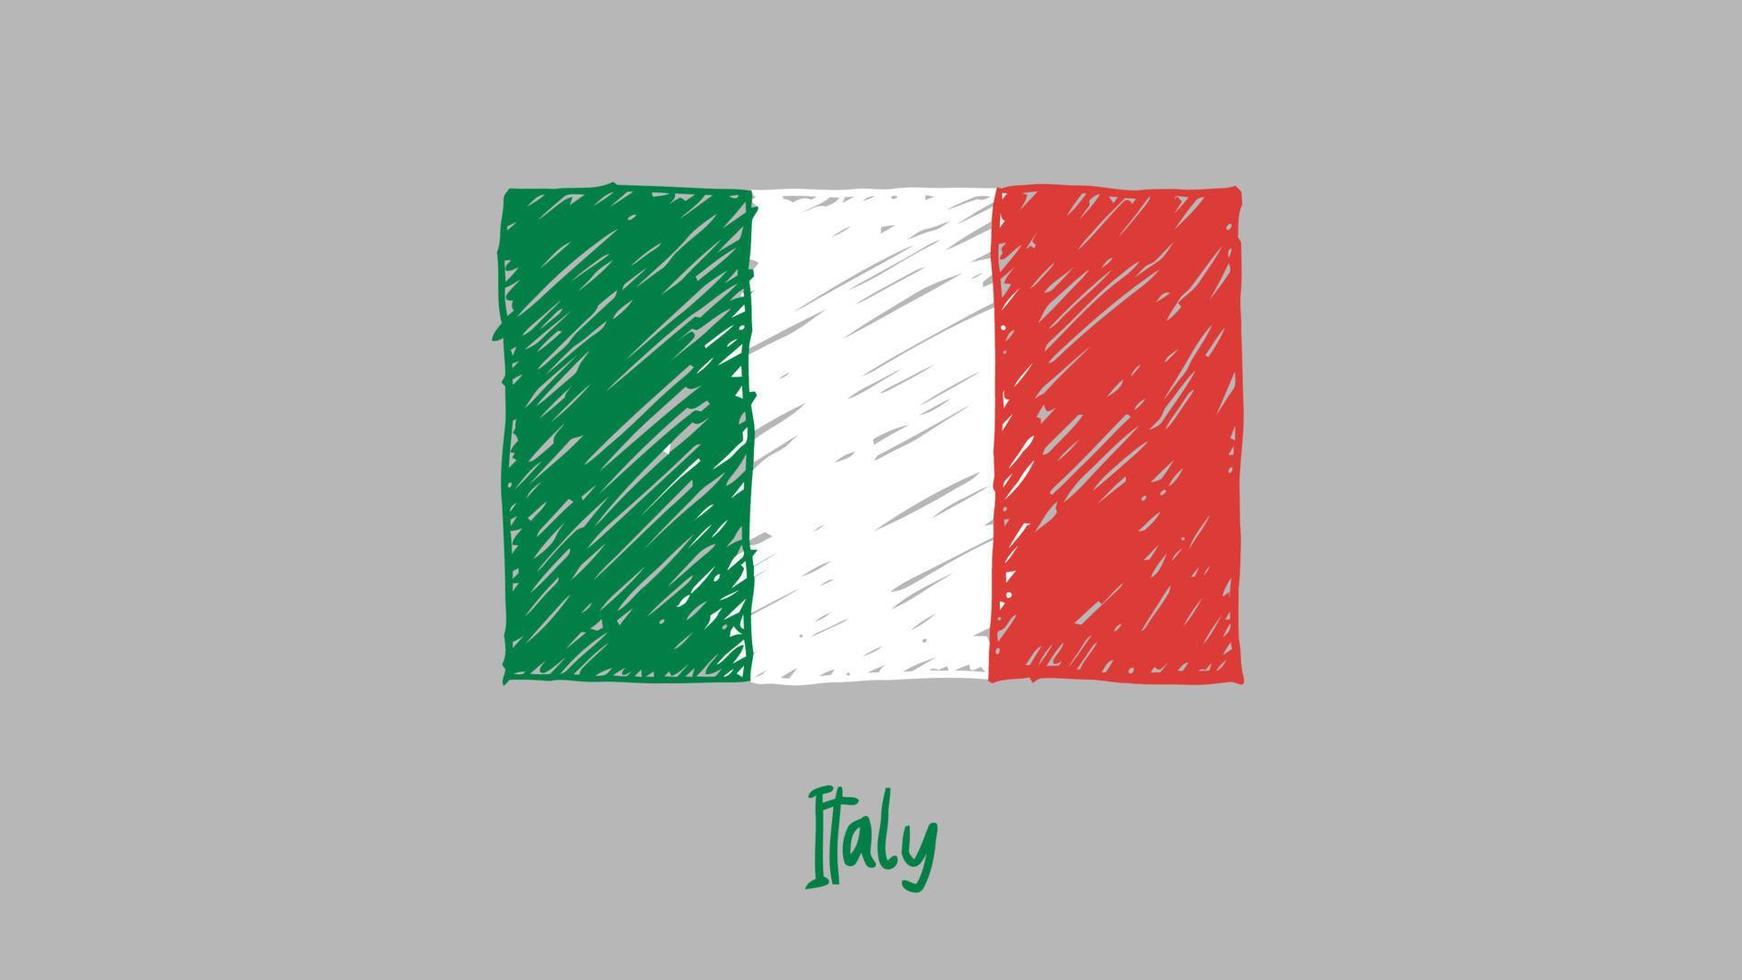 Italy National Country Flag Marker or Pencil Sketch Illustration Vector